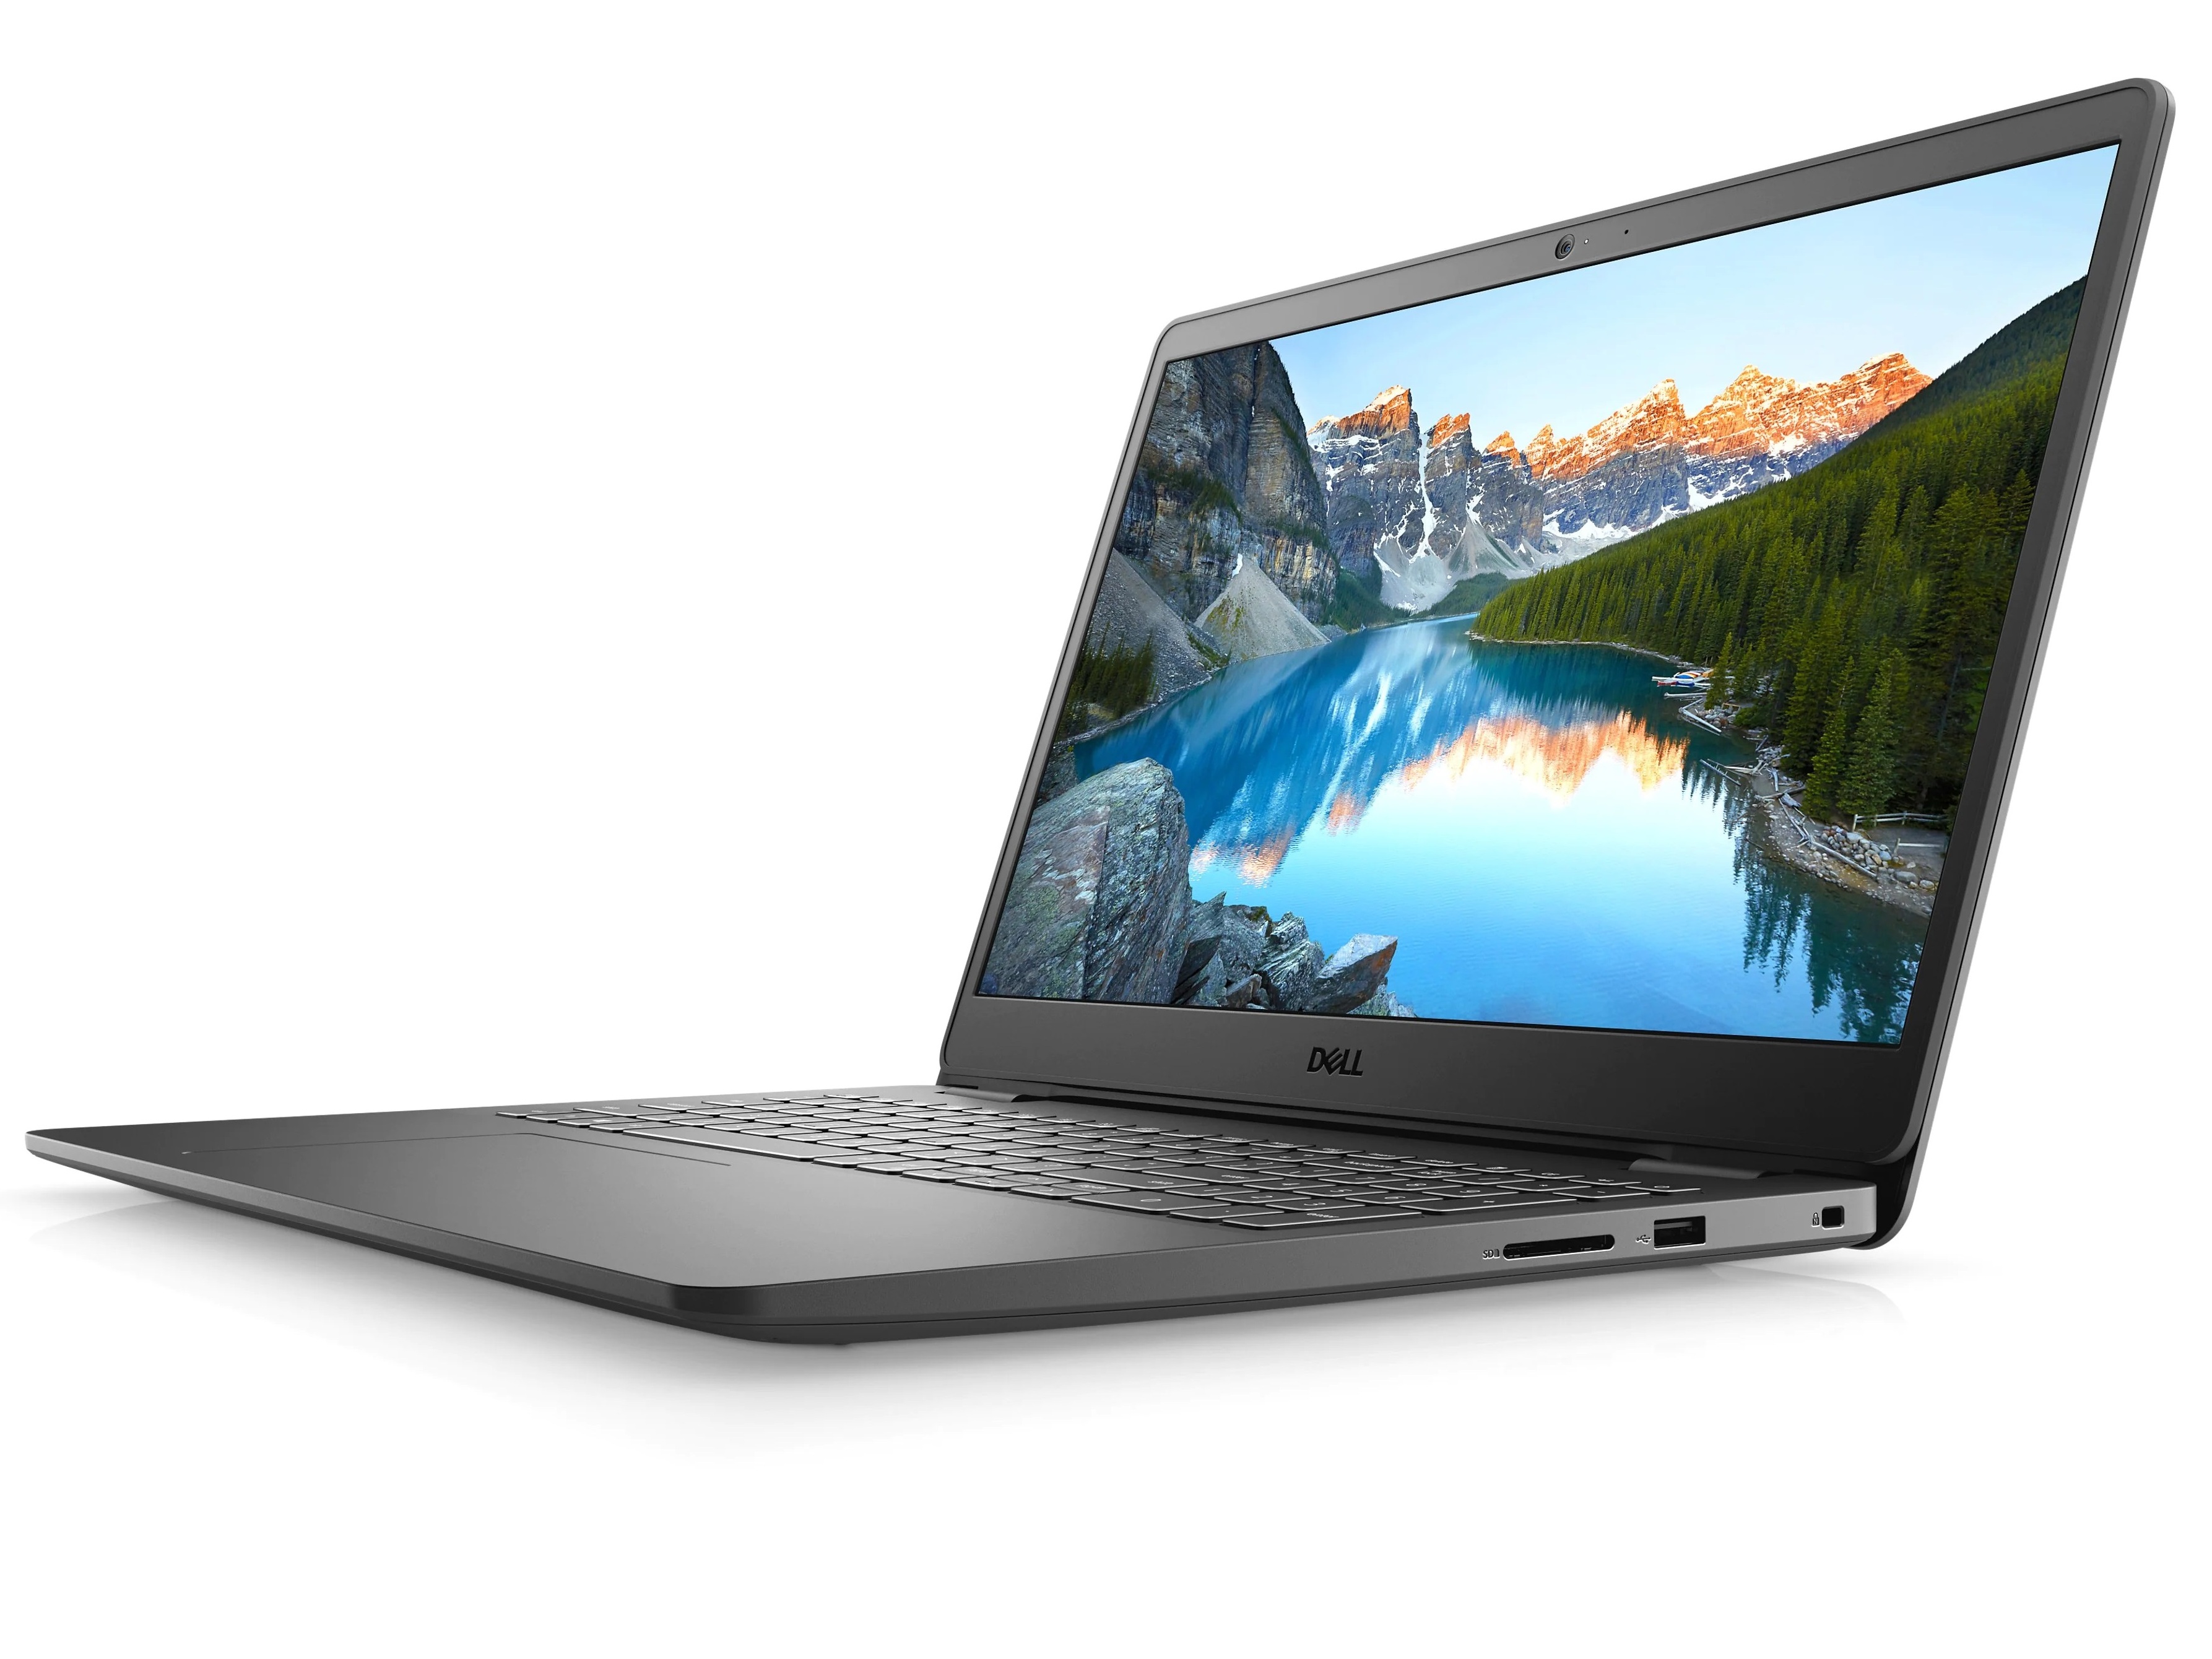 Dell Inspiron 15 3501 on sale with the same 11th gen Core i7 CPU 